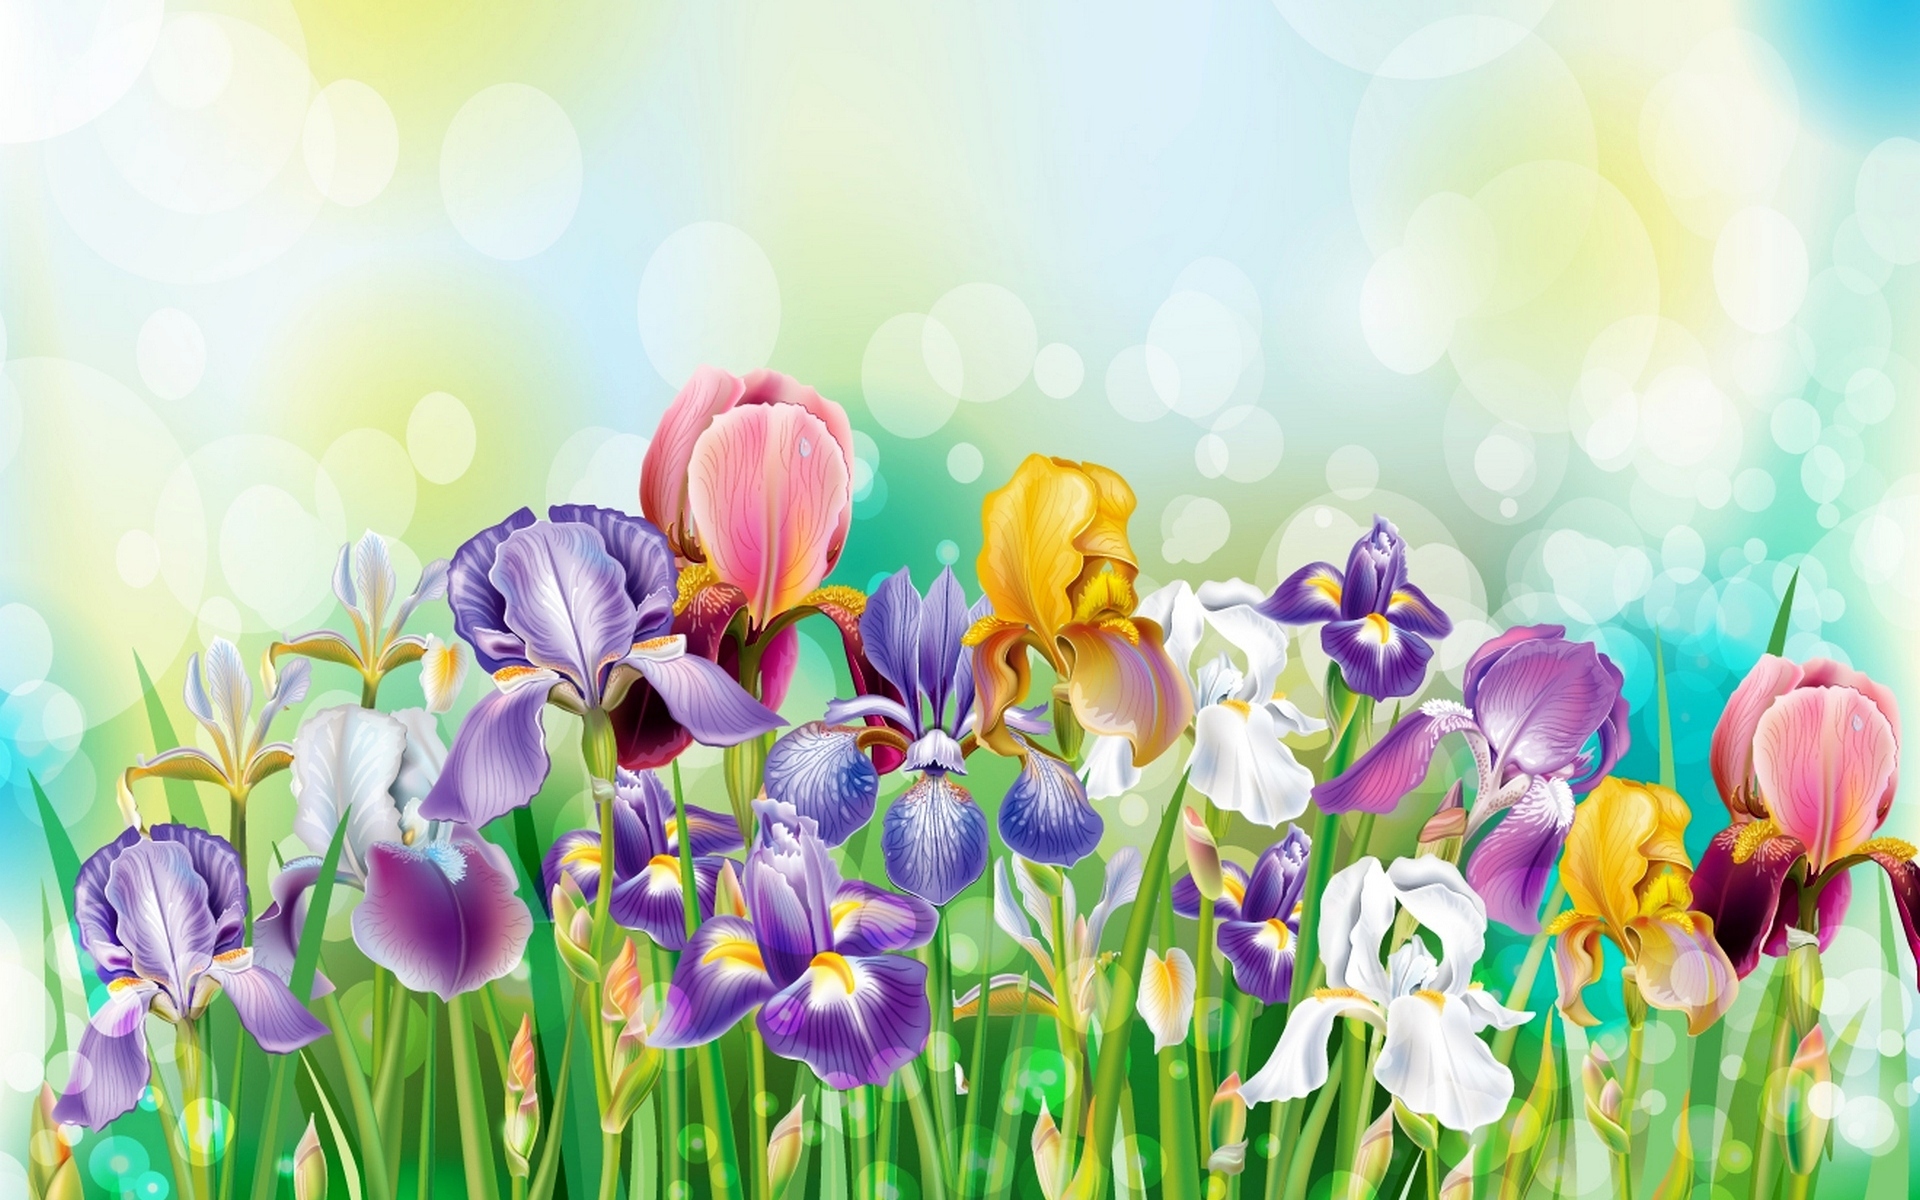 iris, artistic, flower, colorful, colors, grass, spring, flowers